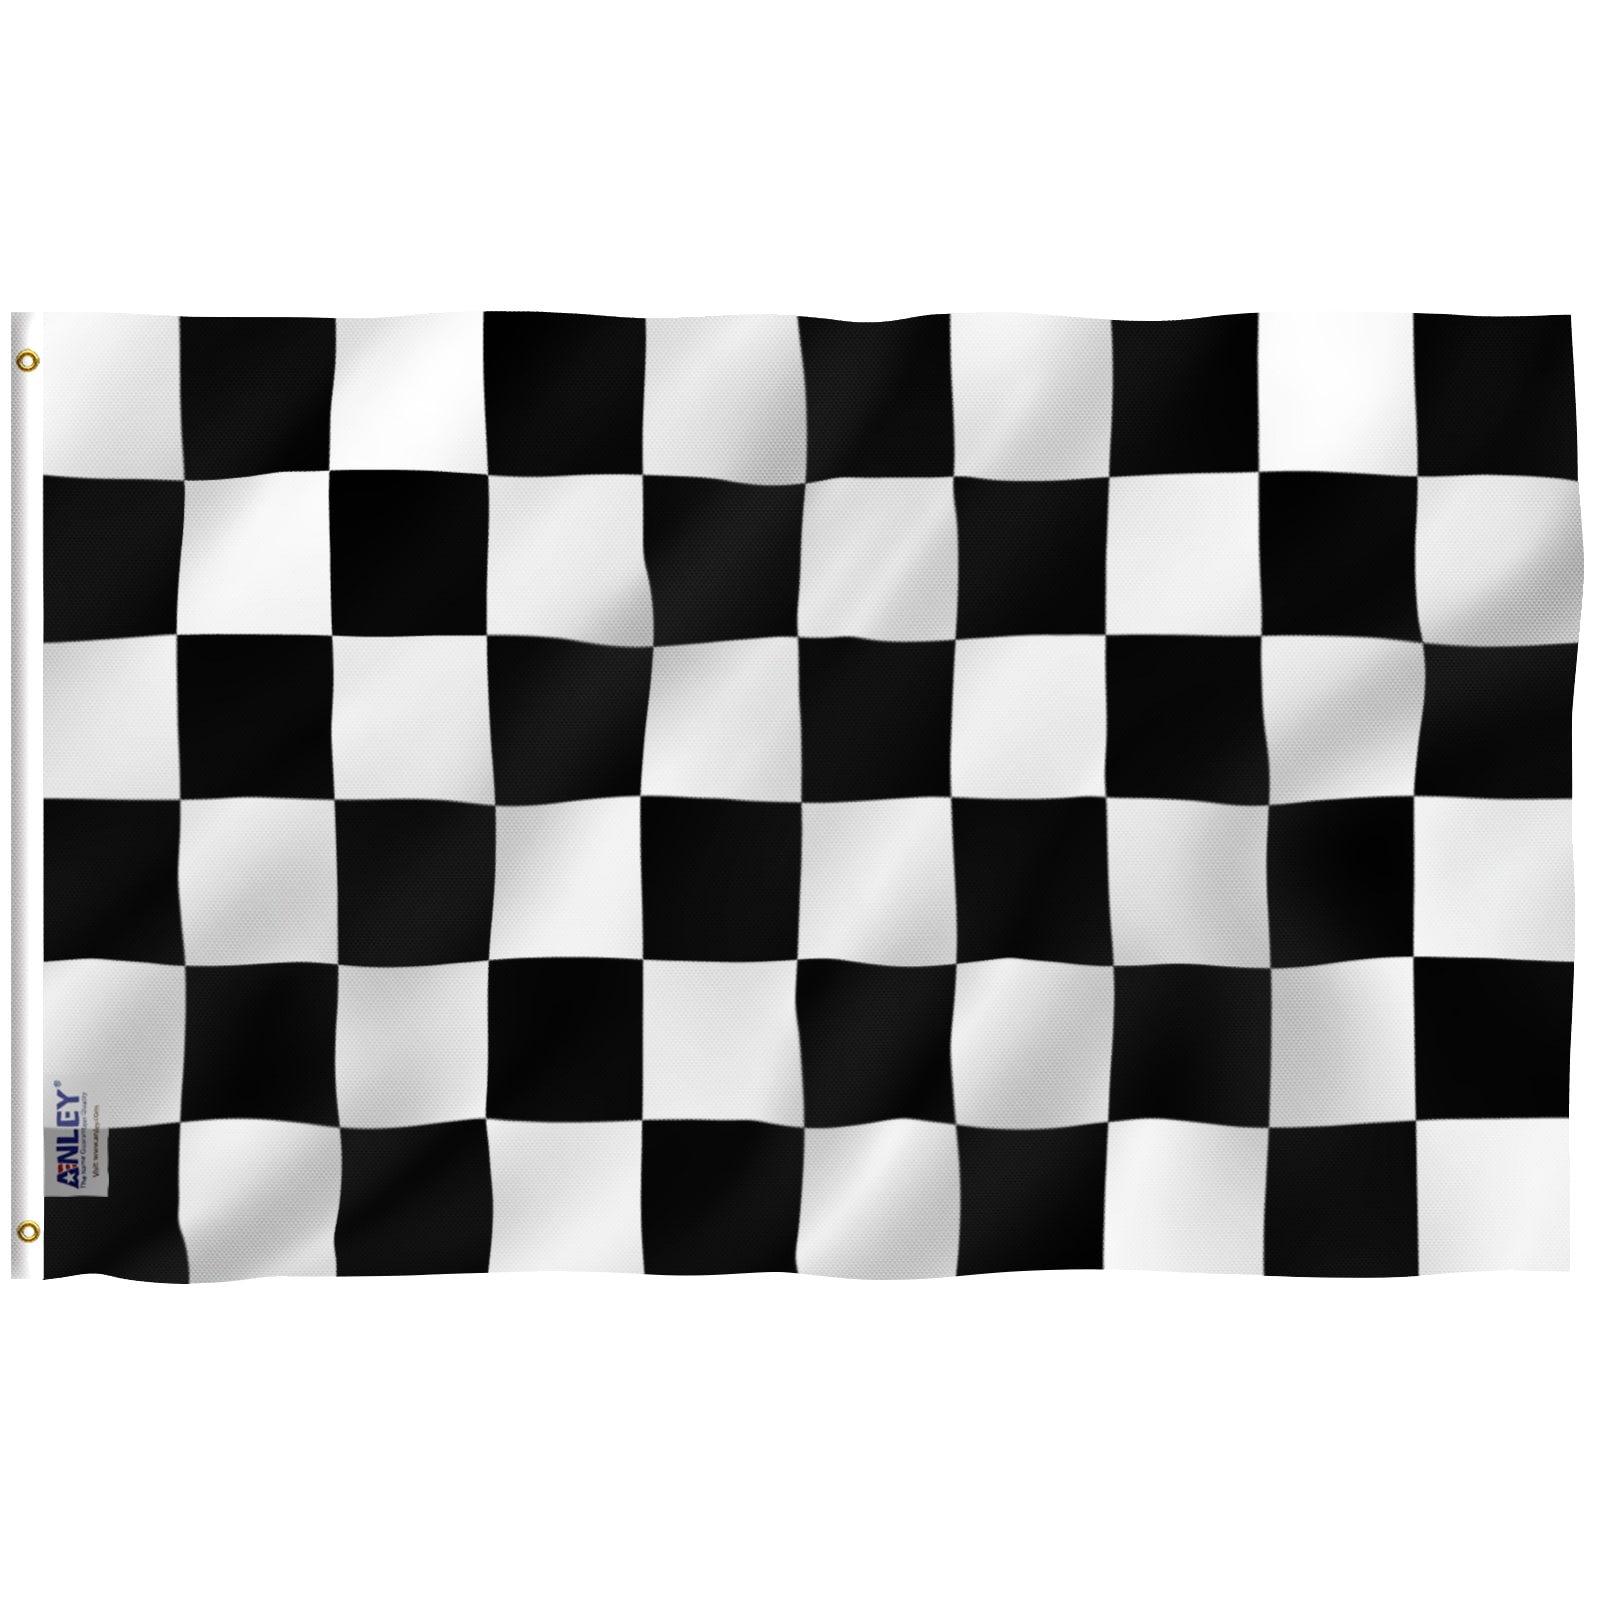 Checkered Flag, Big Black and White, Motor Racing F1 Motorsport Finish  Flag, Racing Flag, Motorsports Accessories, Motor Racing Events, 60 x 40  - By